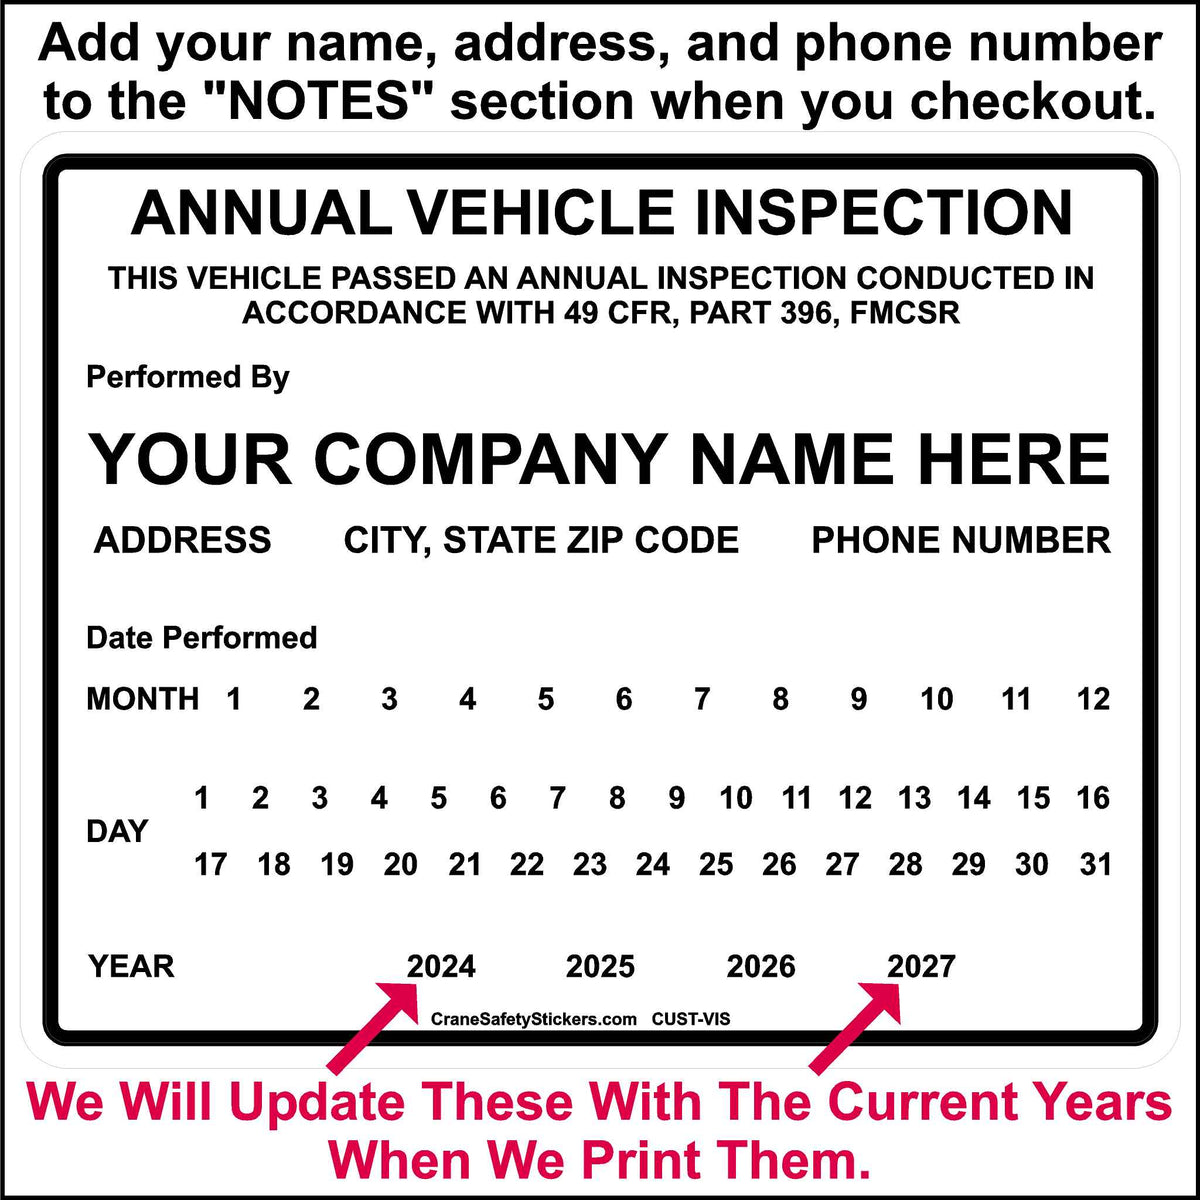 FMCSA Annual Vehicle Inspection Sticker 49 CFR, PART 396, FMCSR. This white Sticker with black lettering is printed with. THIS VEHICLE PASSED AN ANNUAL INSPECTION CONDUCTED IN ACCORDANCE WITH 49 CFR, PART 396, FMCSR. We include a place for your company name, address, and phone number. It has all 12 months, 31 days, and 4 consecutive years to be punched out on the date the inspection is performed. 